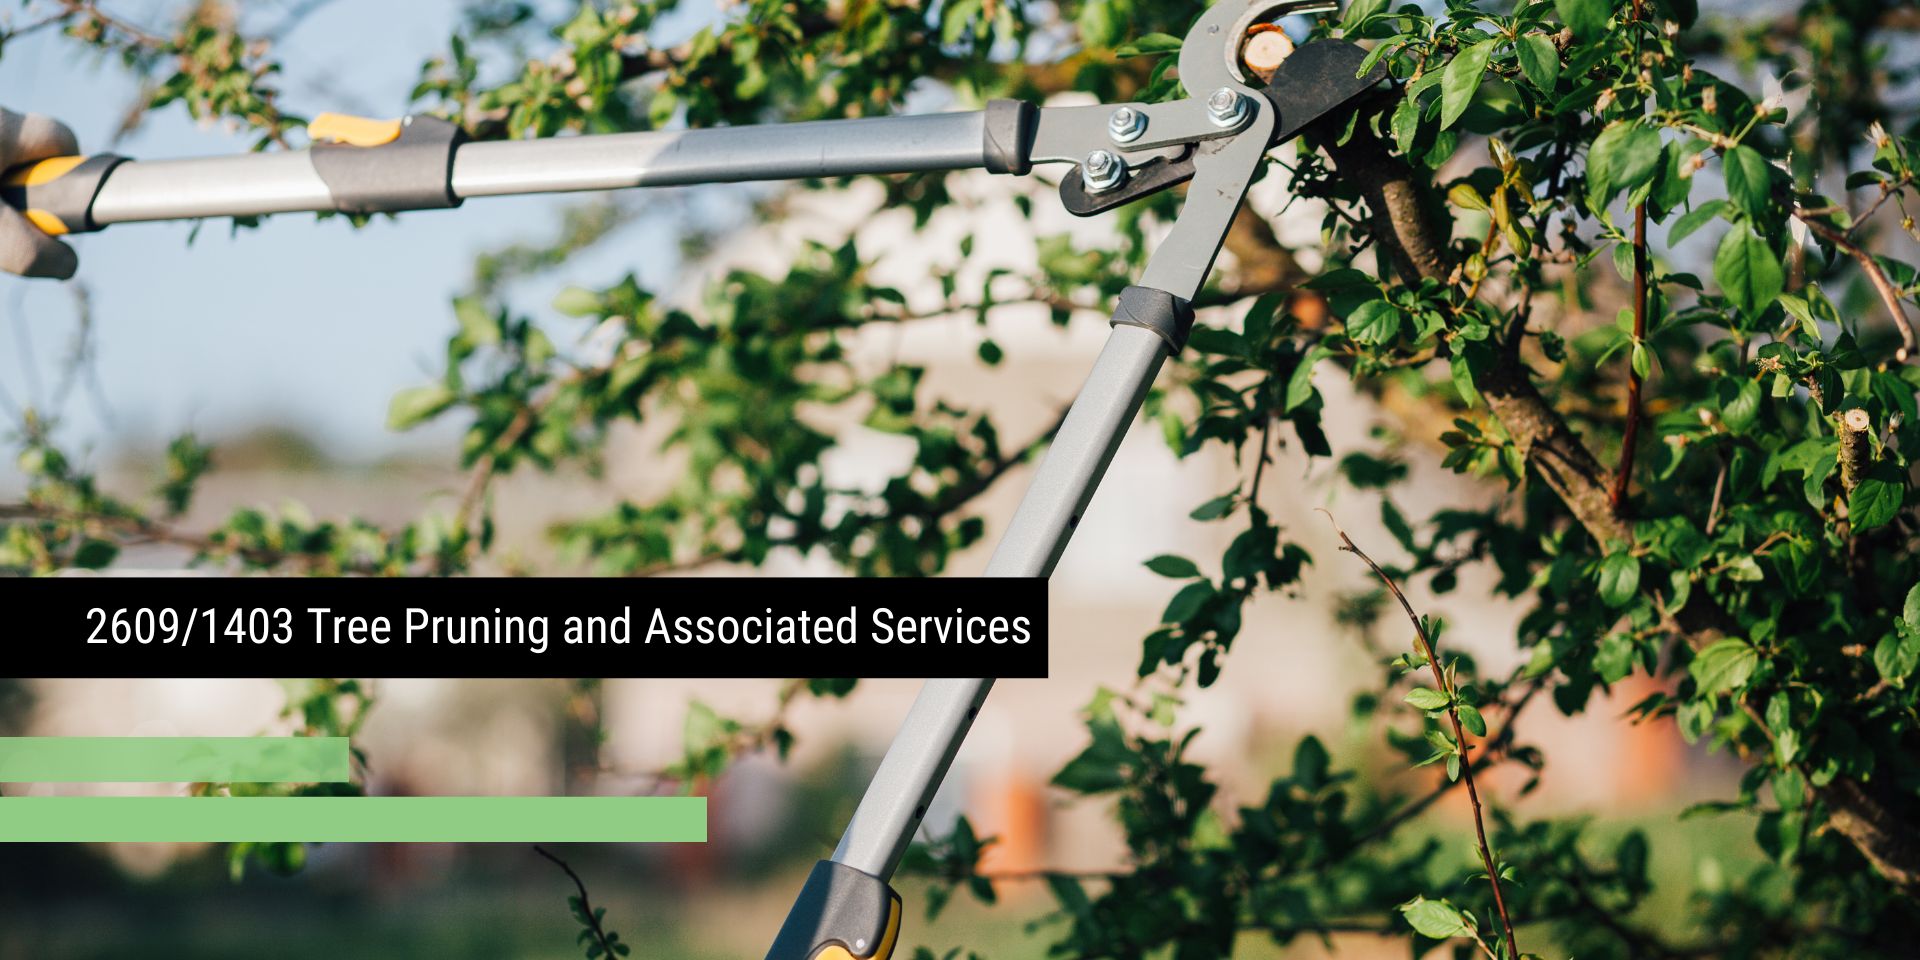 New Contract: 2609/1403 – Tree Pruning and Associated Services